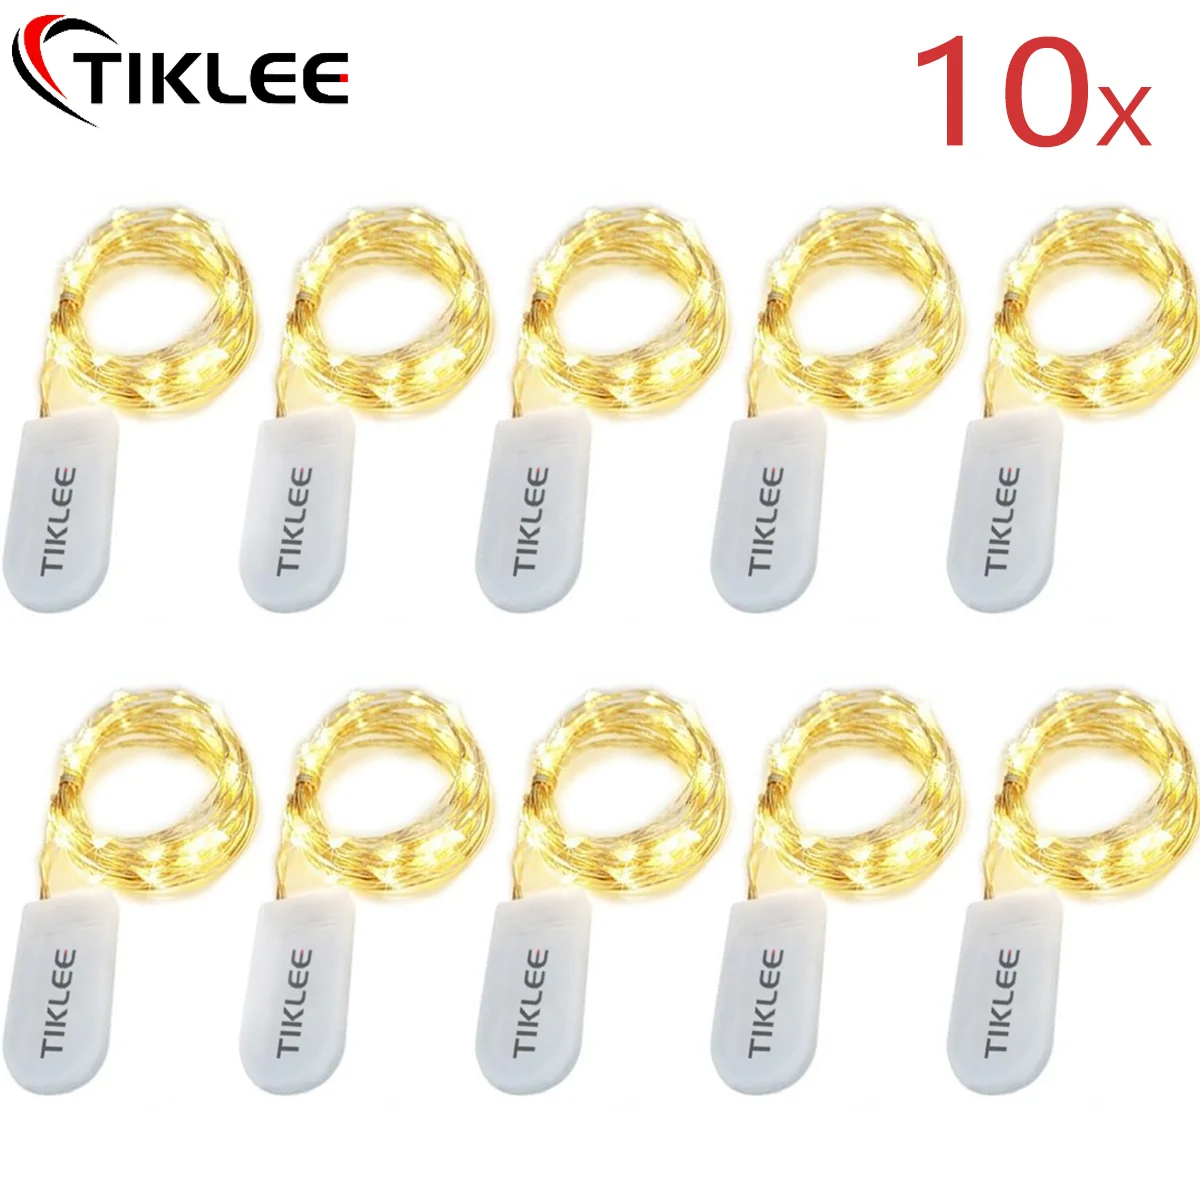 10pcs Led Fairy Lights Battery String Lights Firefly Starry Moon StarLights for DIY Wedding Party Bedroom Patio Christmas 7w 8w led e27 rechargeable emergency bulb e27 dimmable bulb for party patio white light warm white 1800 2200ma 2600ma